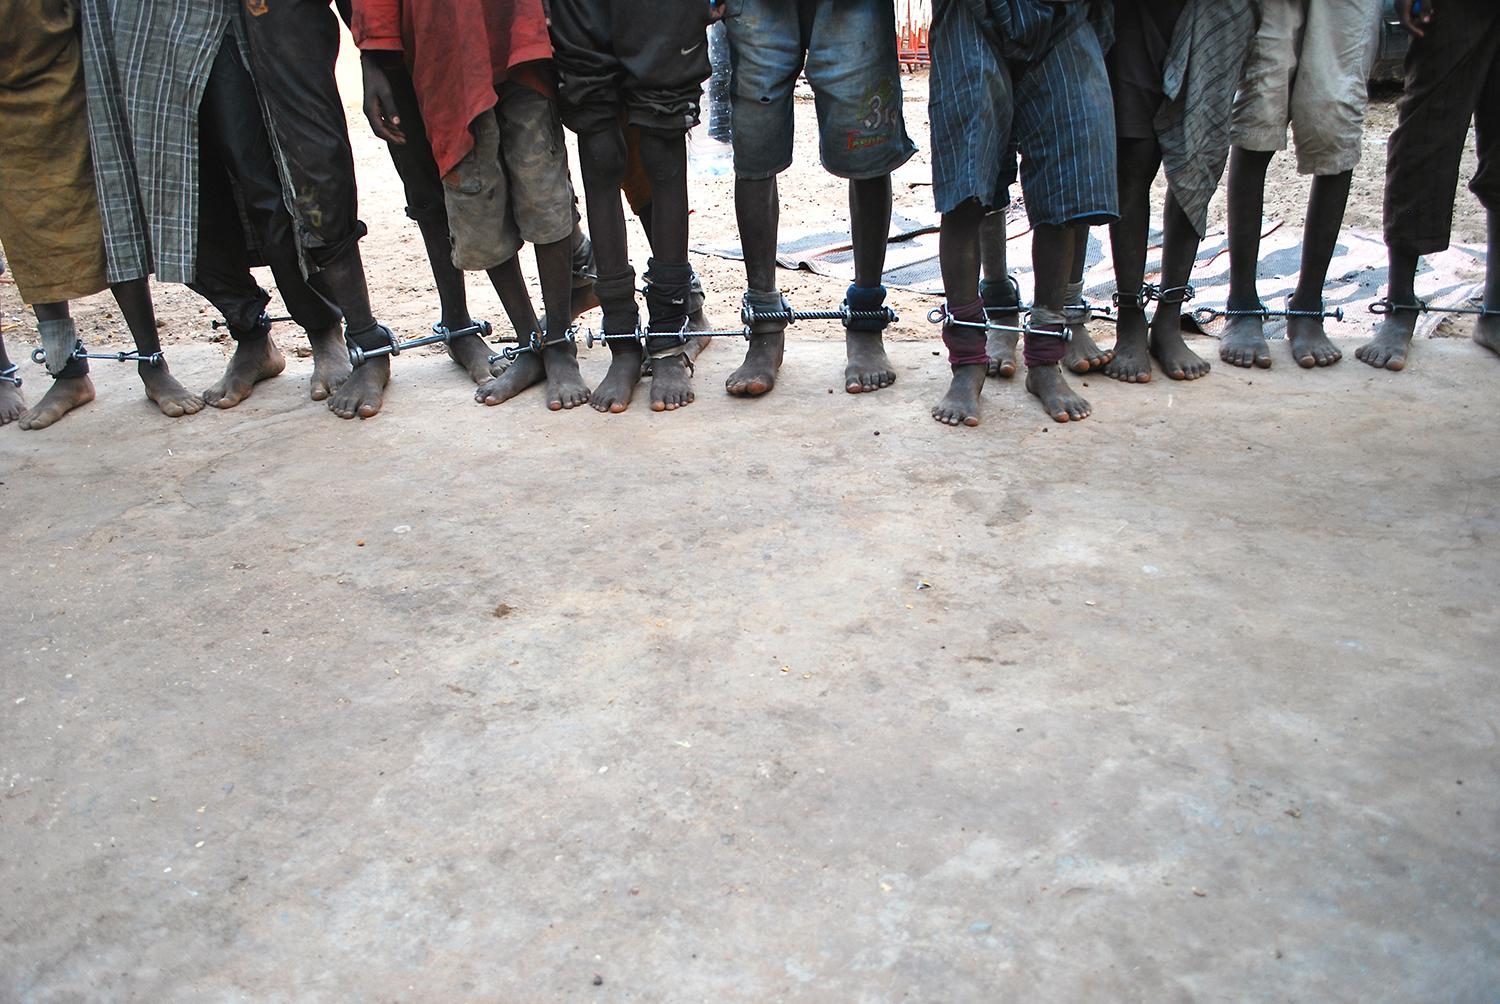 More than a dozen talibÃ© boys between the ages of 6 and 14 were found shackled with iron bars in their Quranic school in Diourbel,Senegal